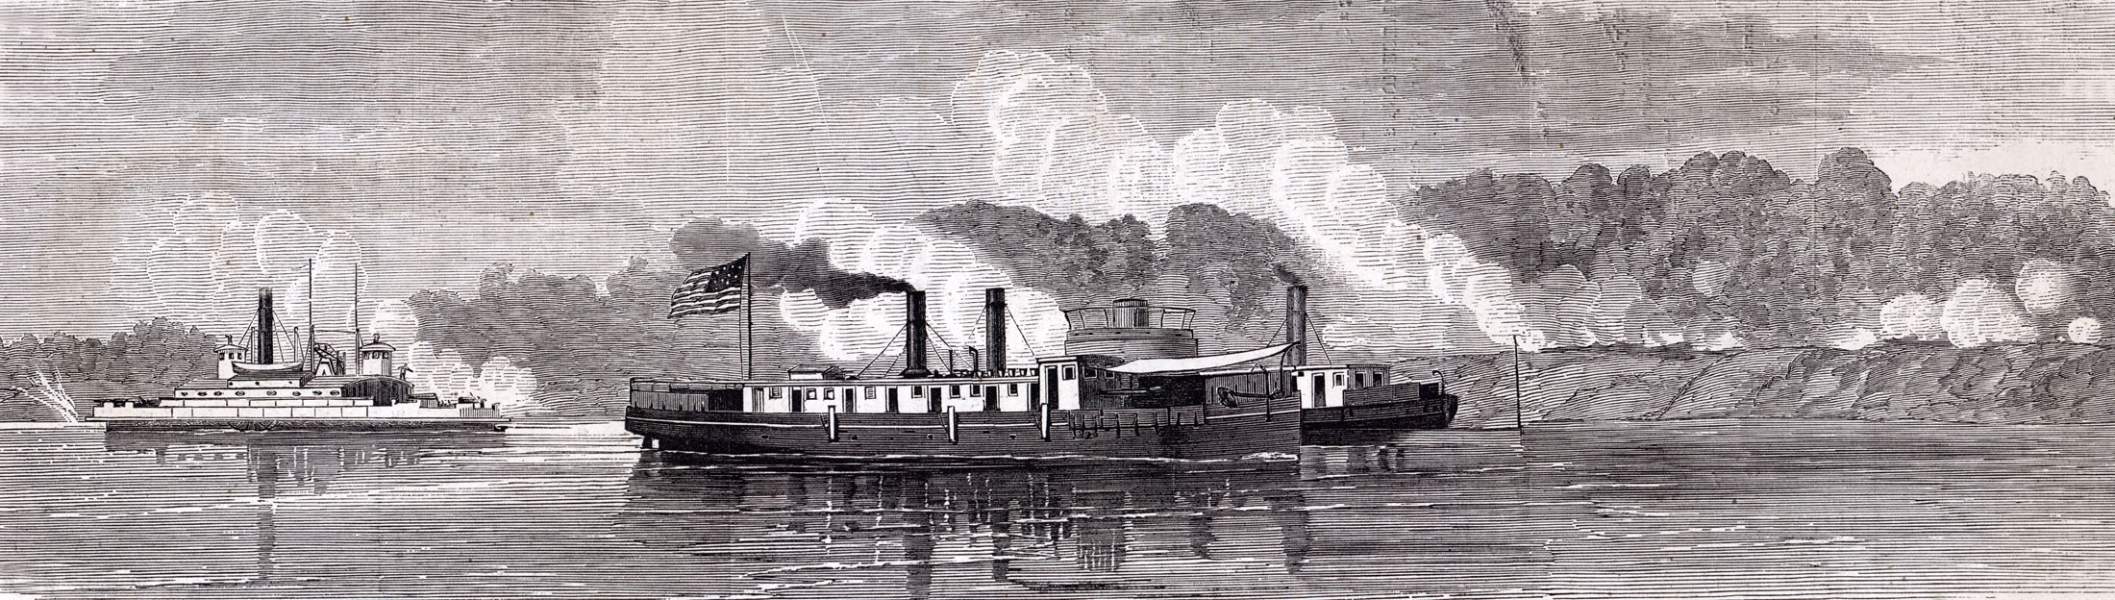 U.S. gunboats in action against Confederate batteries on the James River, August 4, 1863, artist's impression, zoomable image